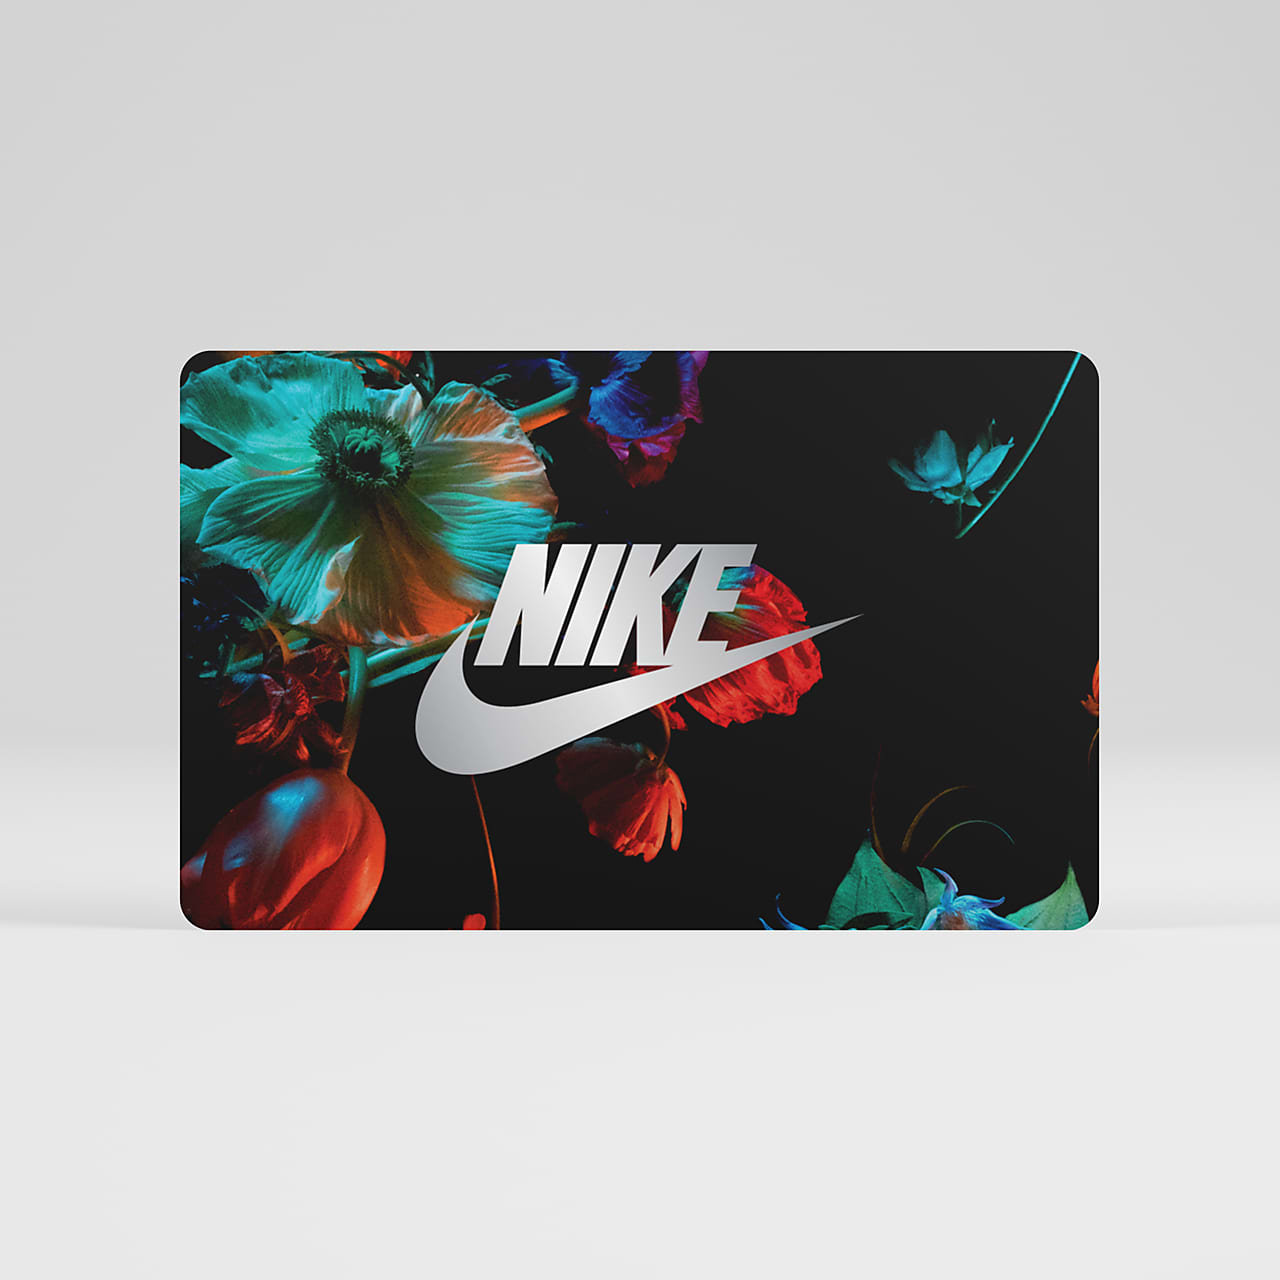 Nike Digital Gift Card Emailed in 24 Hours or Less. Nike.com